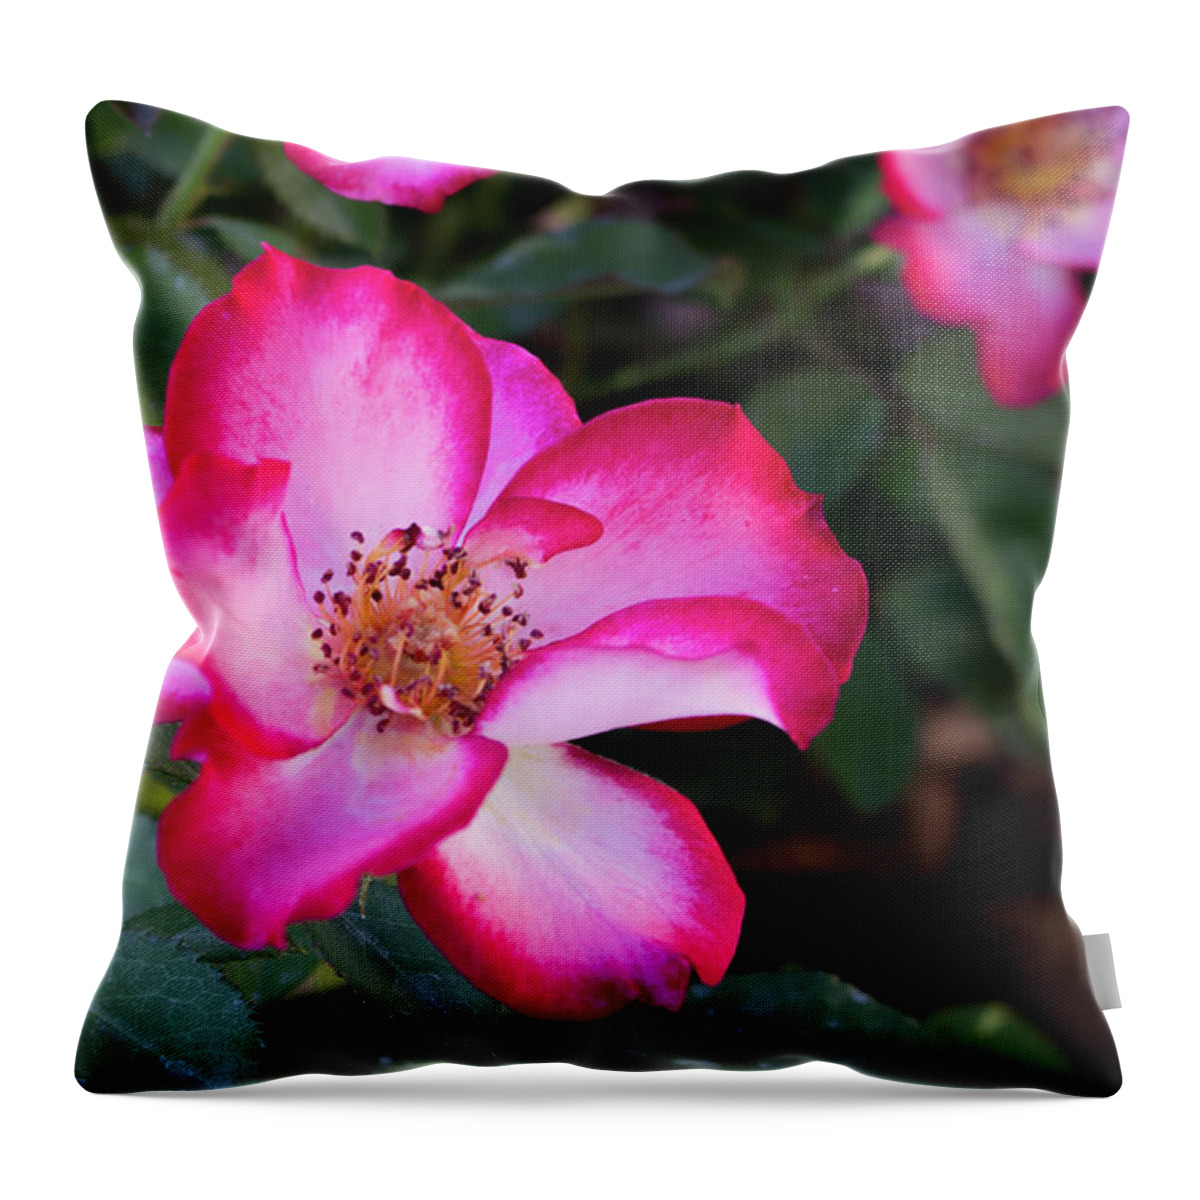 Close-up Throw Pillow featuring the photograph Betty Boop Roses by K Bradley Washburn